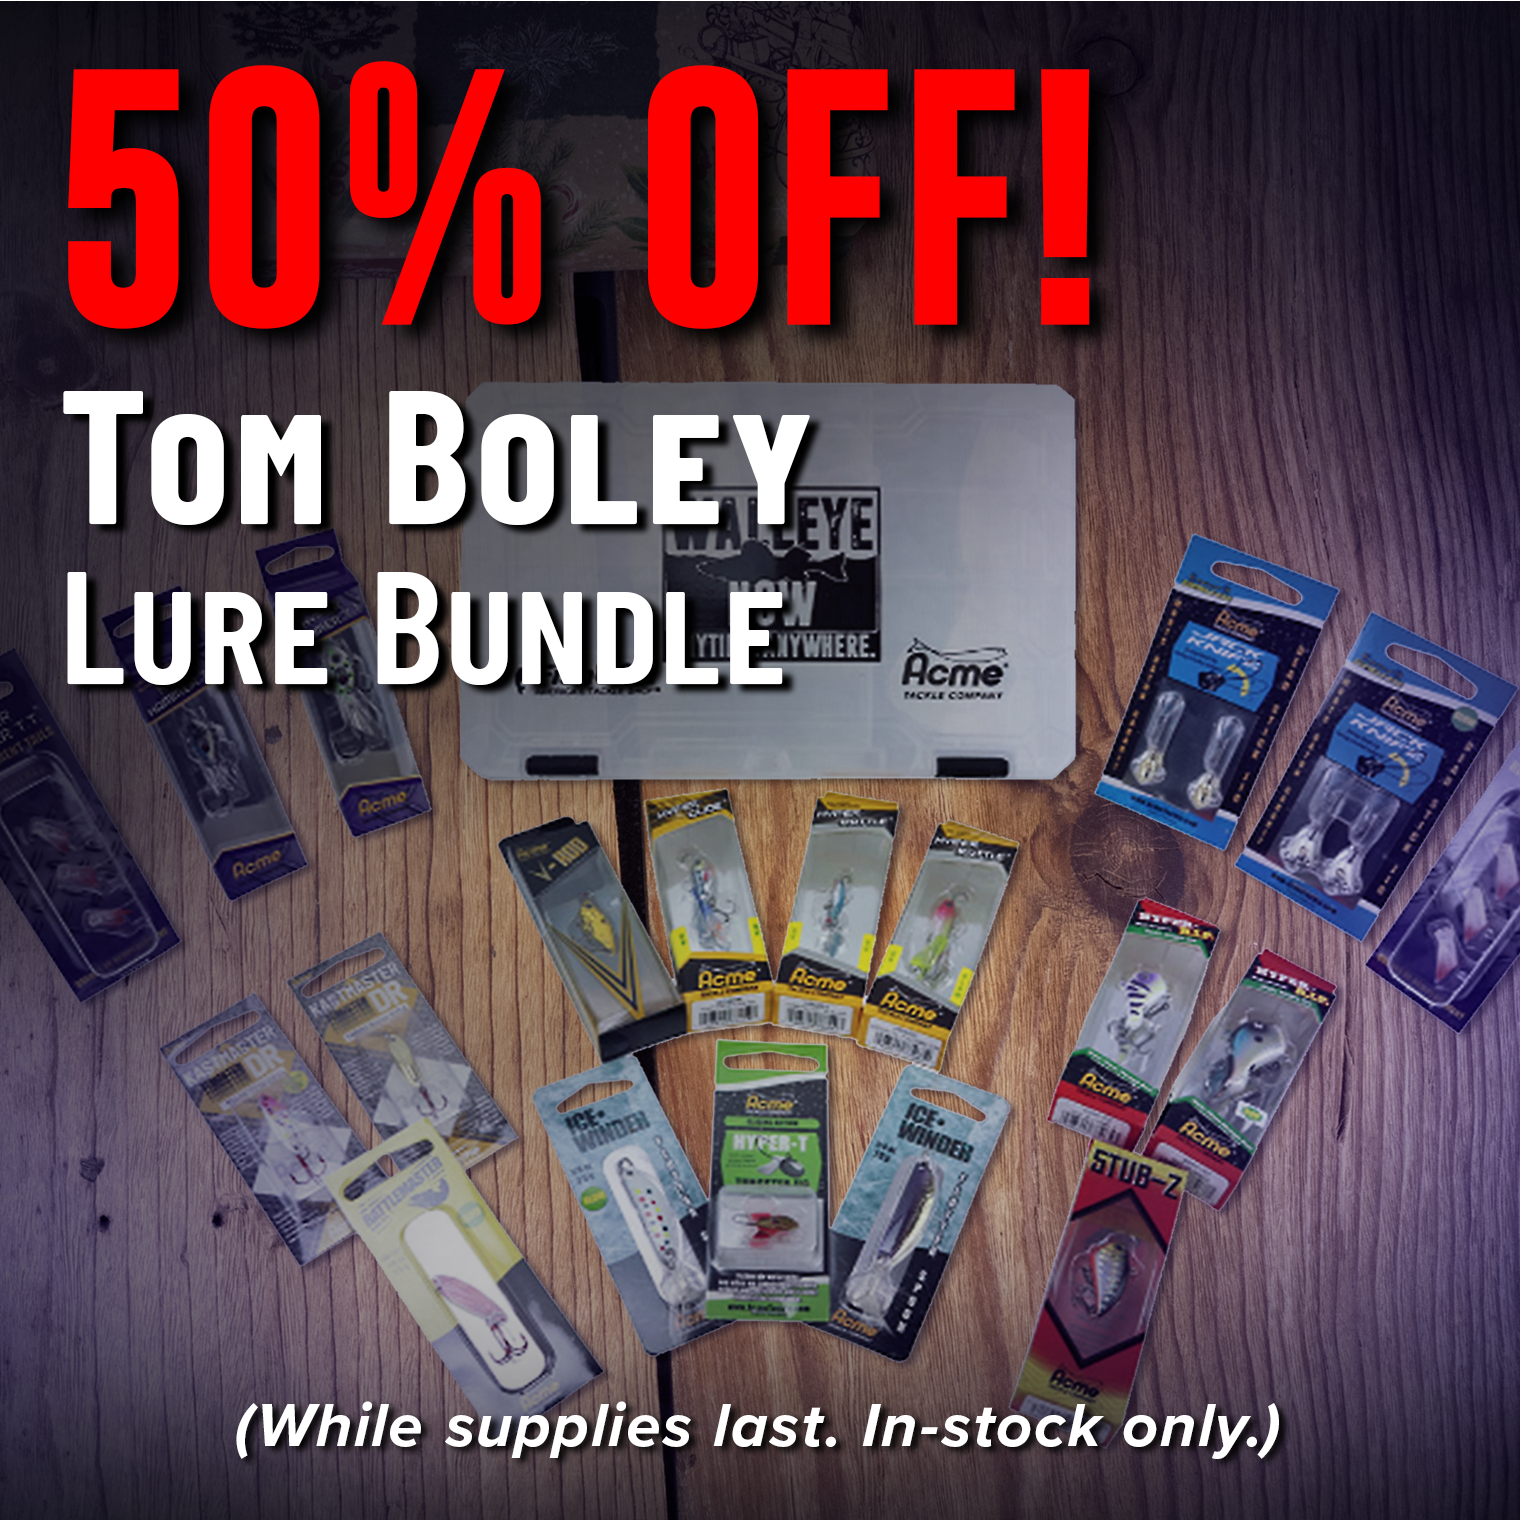 50% Off! Tom Boley Lure Bundle (While supplies last. In-stock only.)